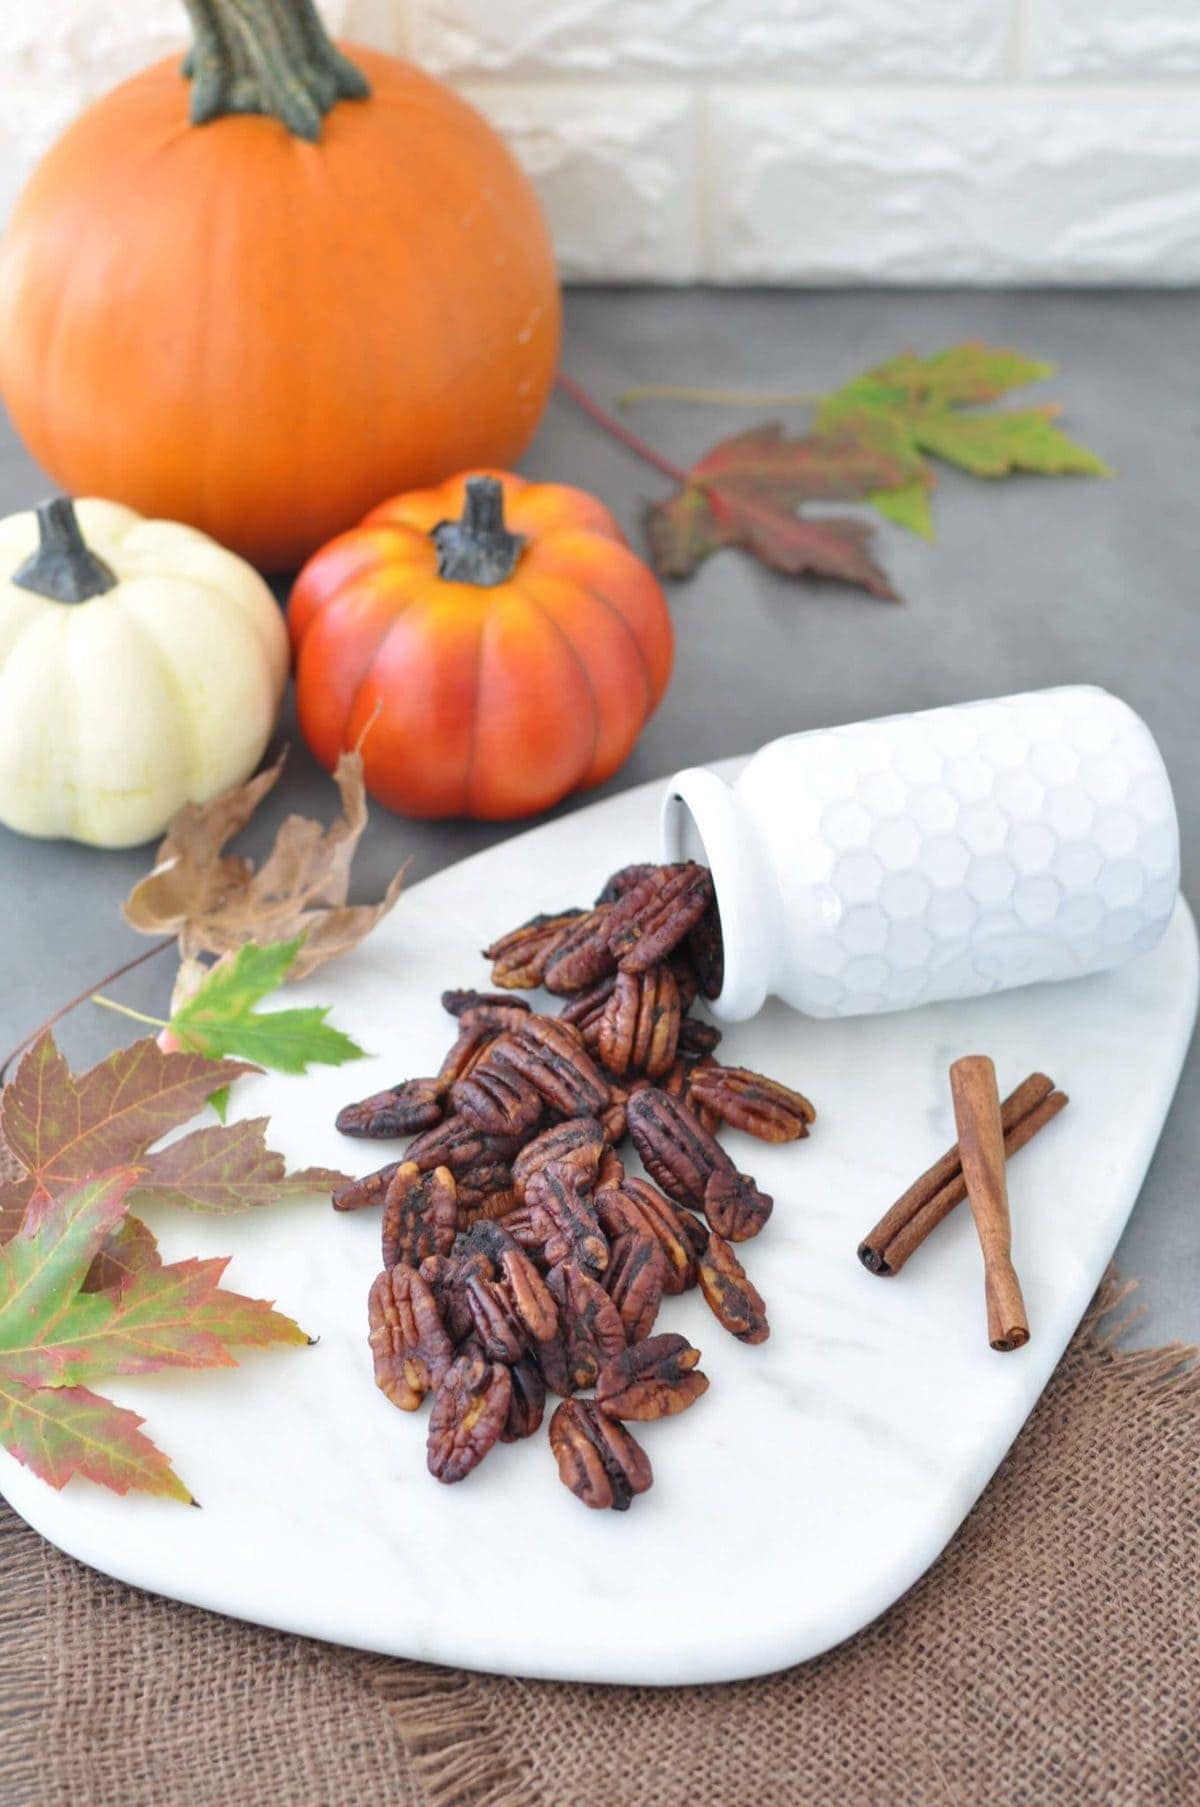 Roasted pecans, surrounded by leaves, cinnamon sticks and pumpkins.